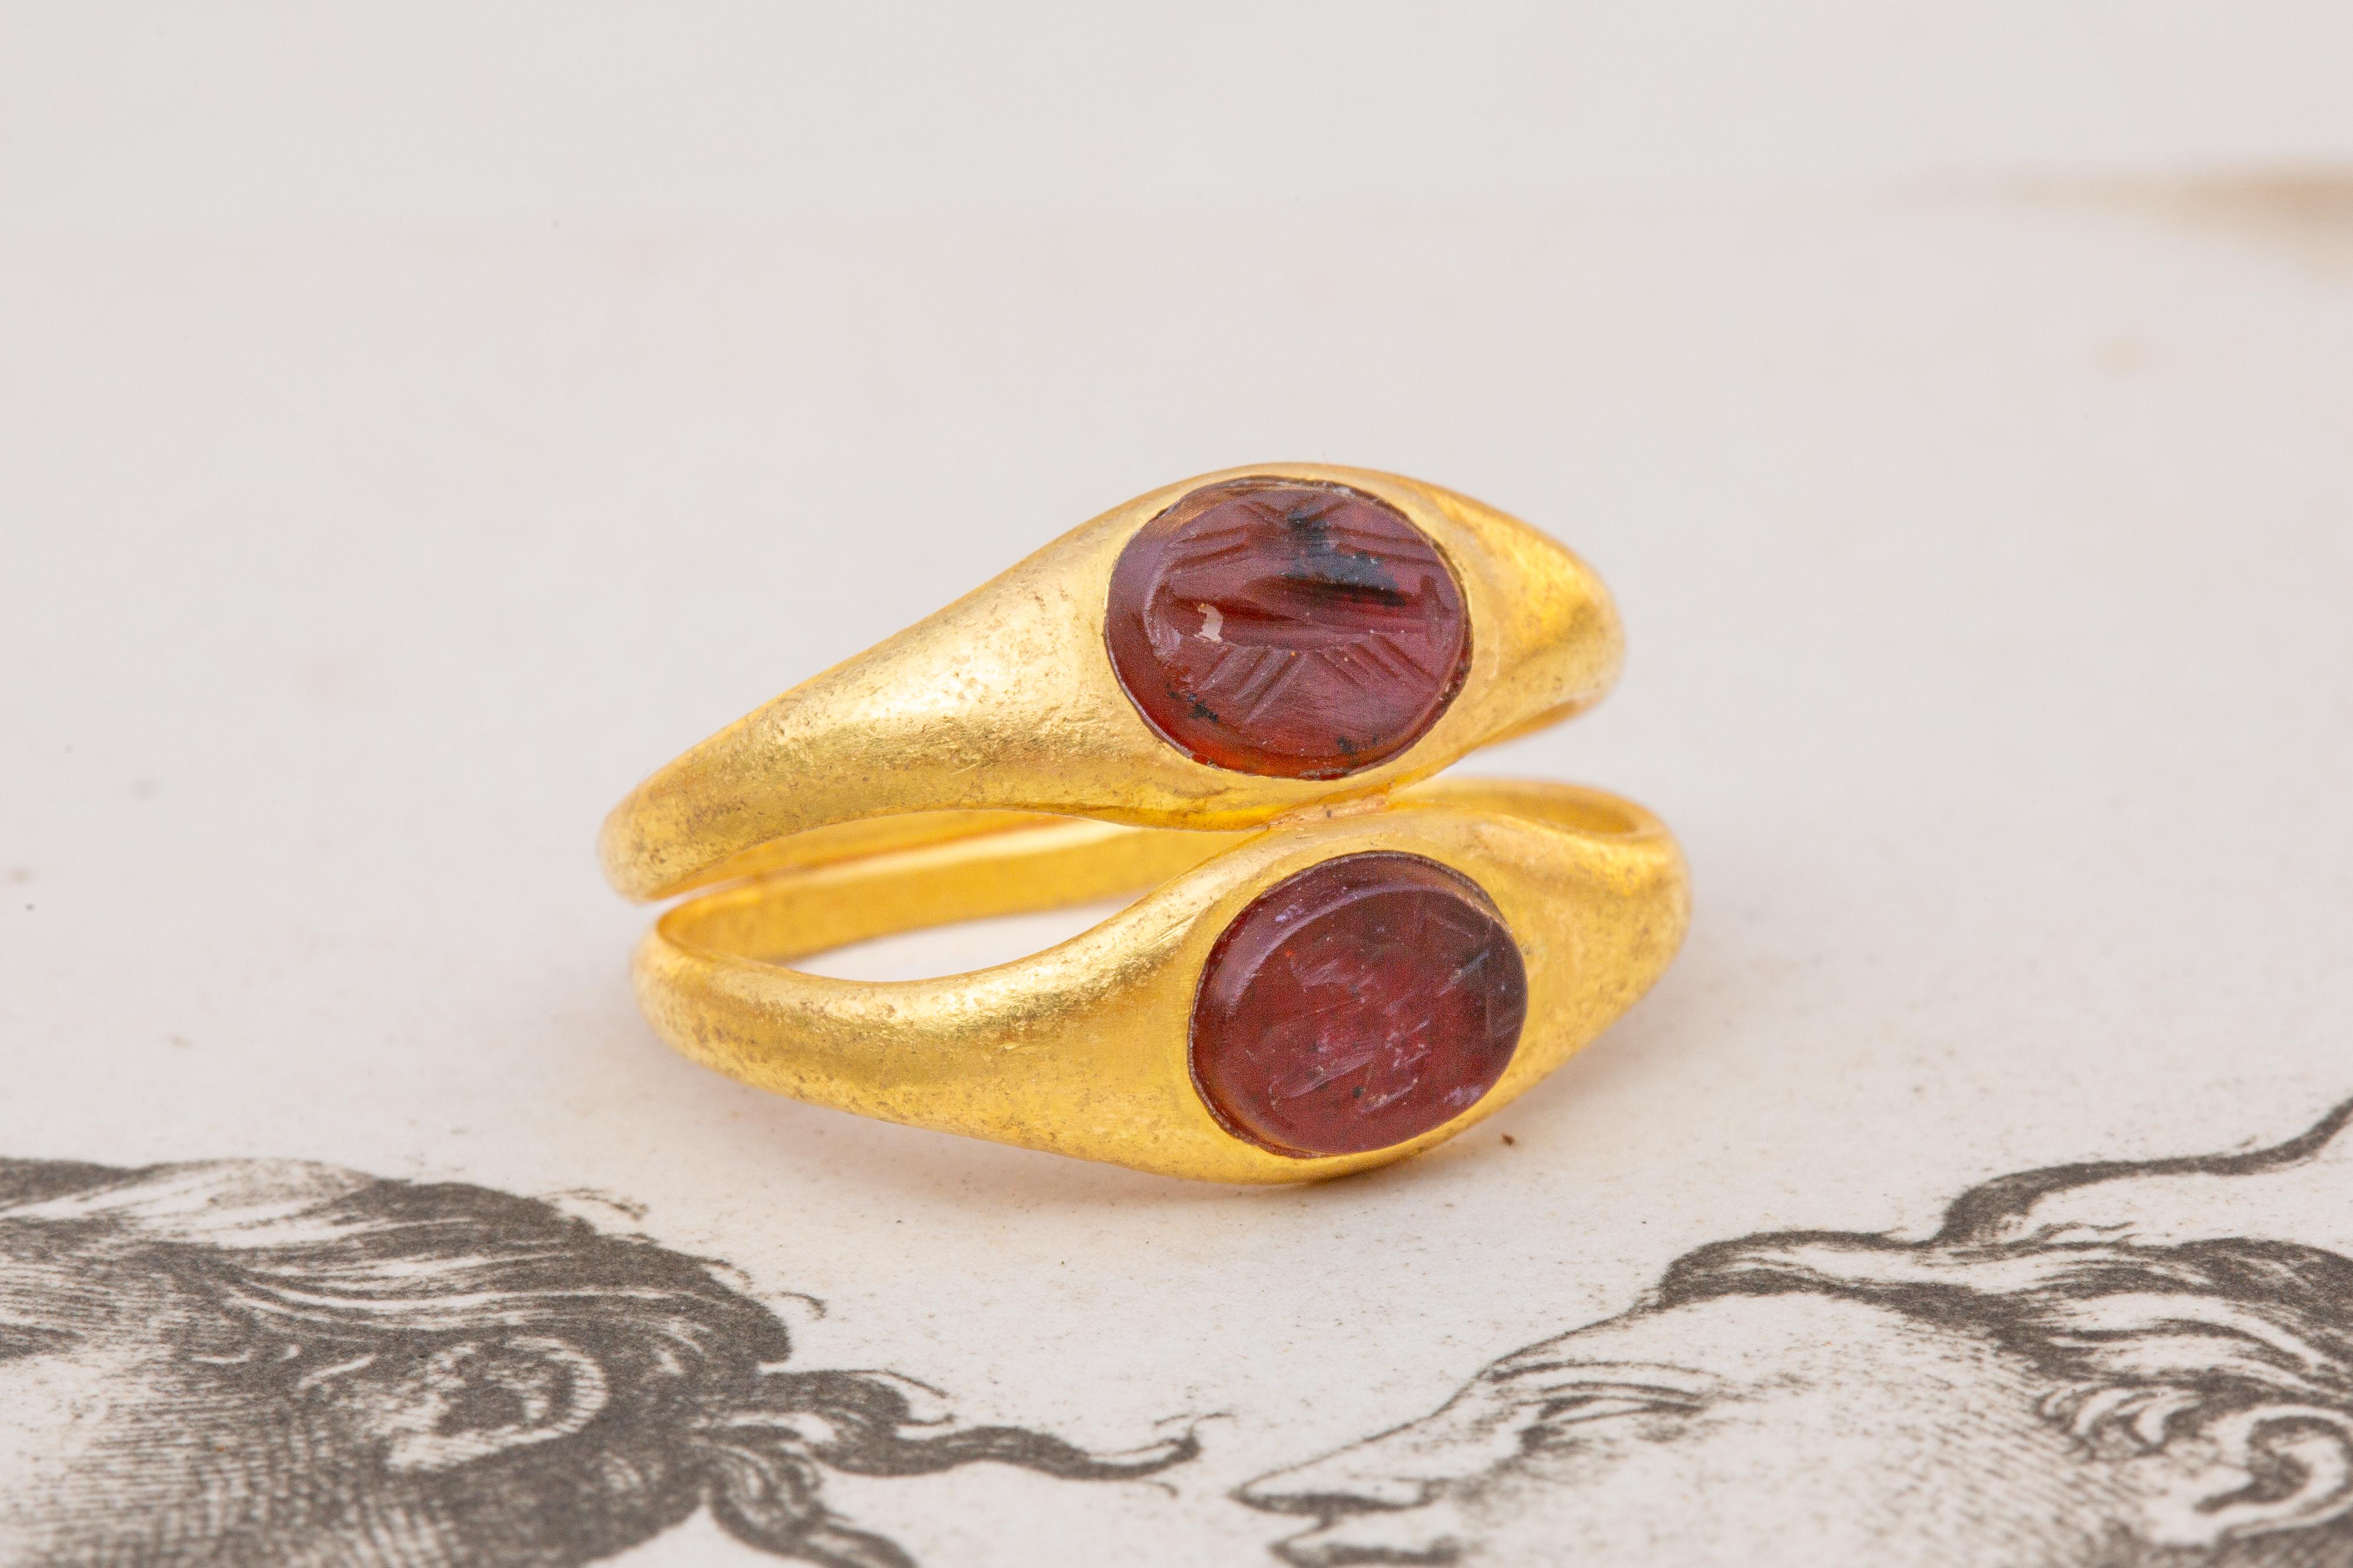 carnelian ring meaning